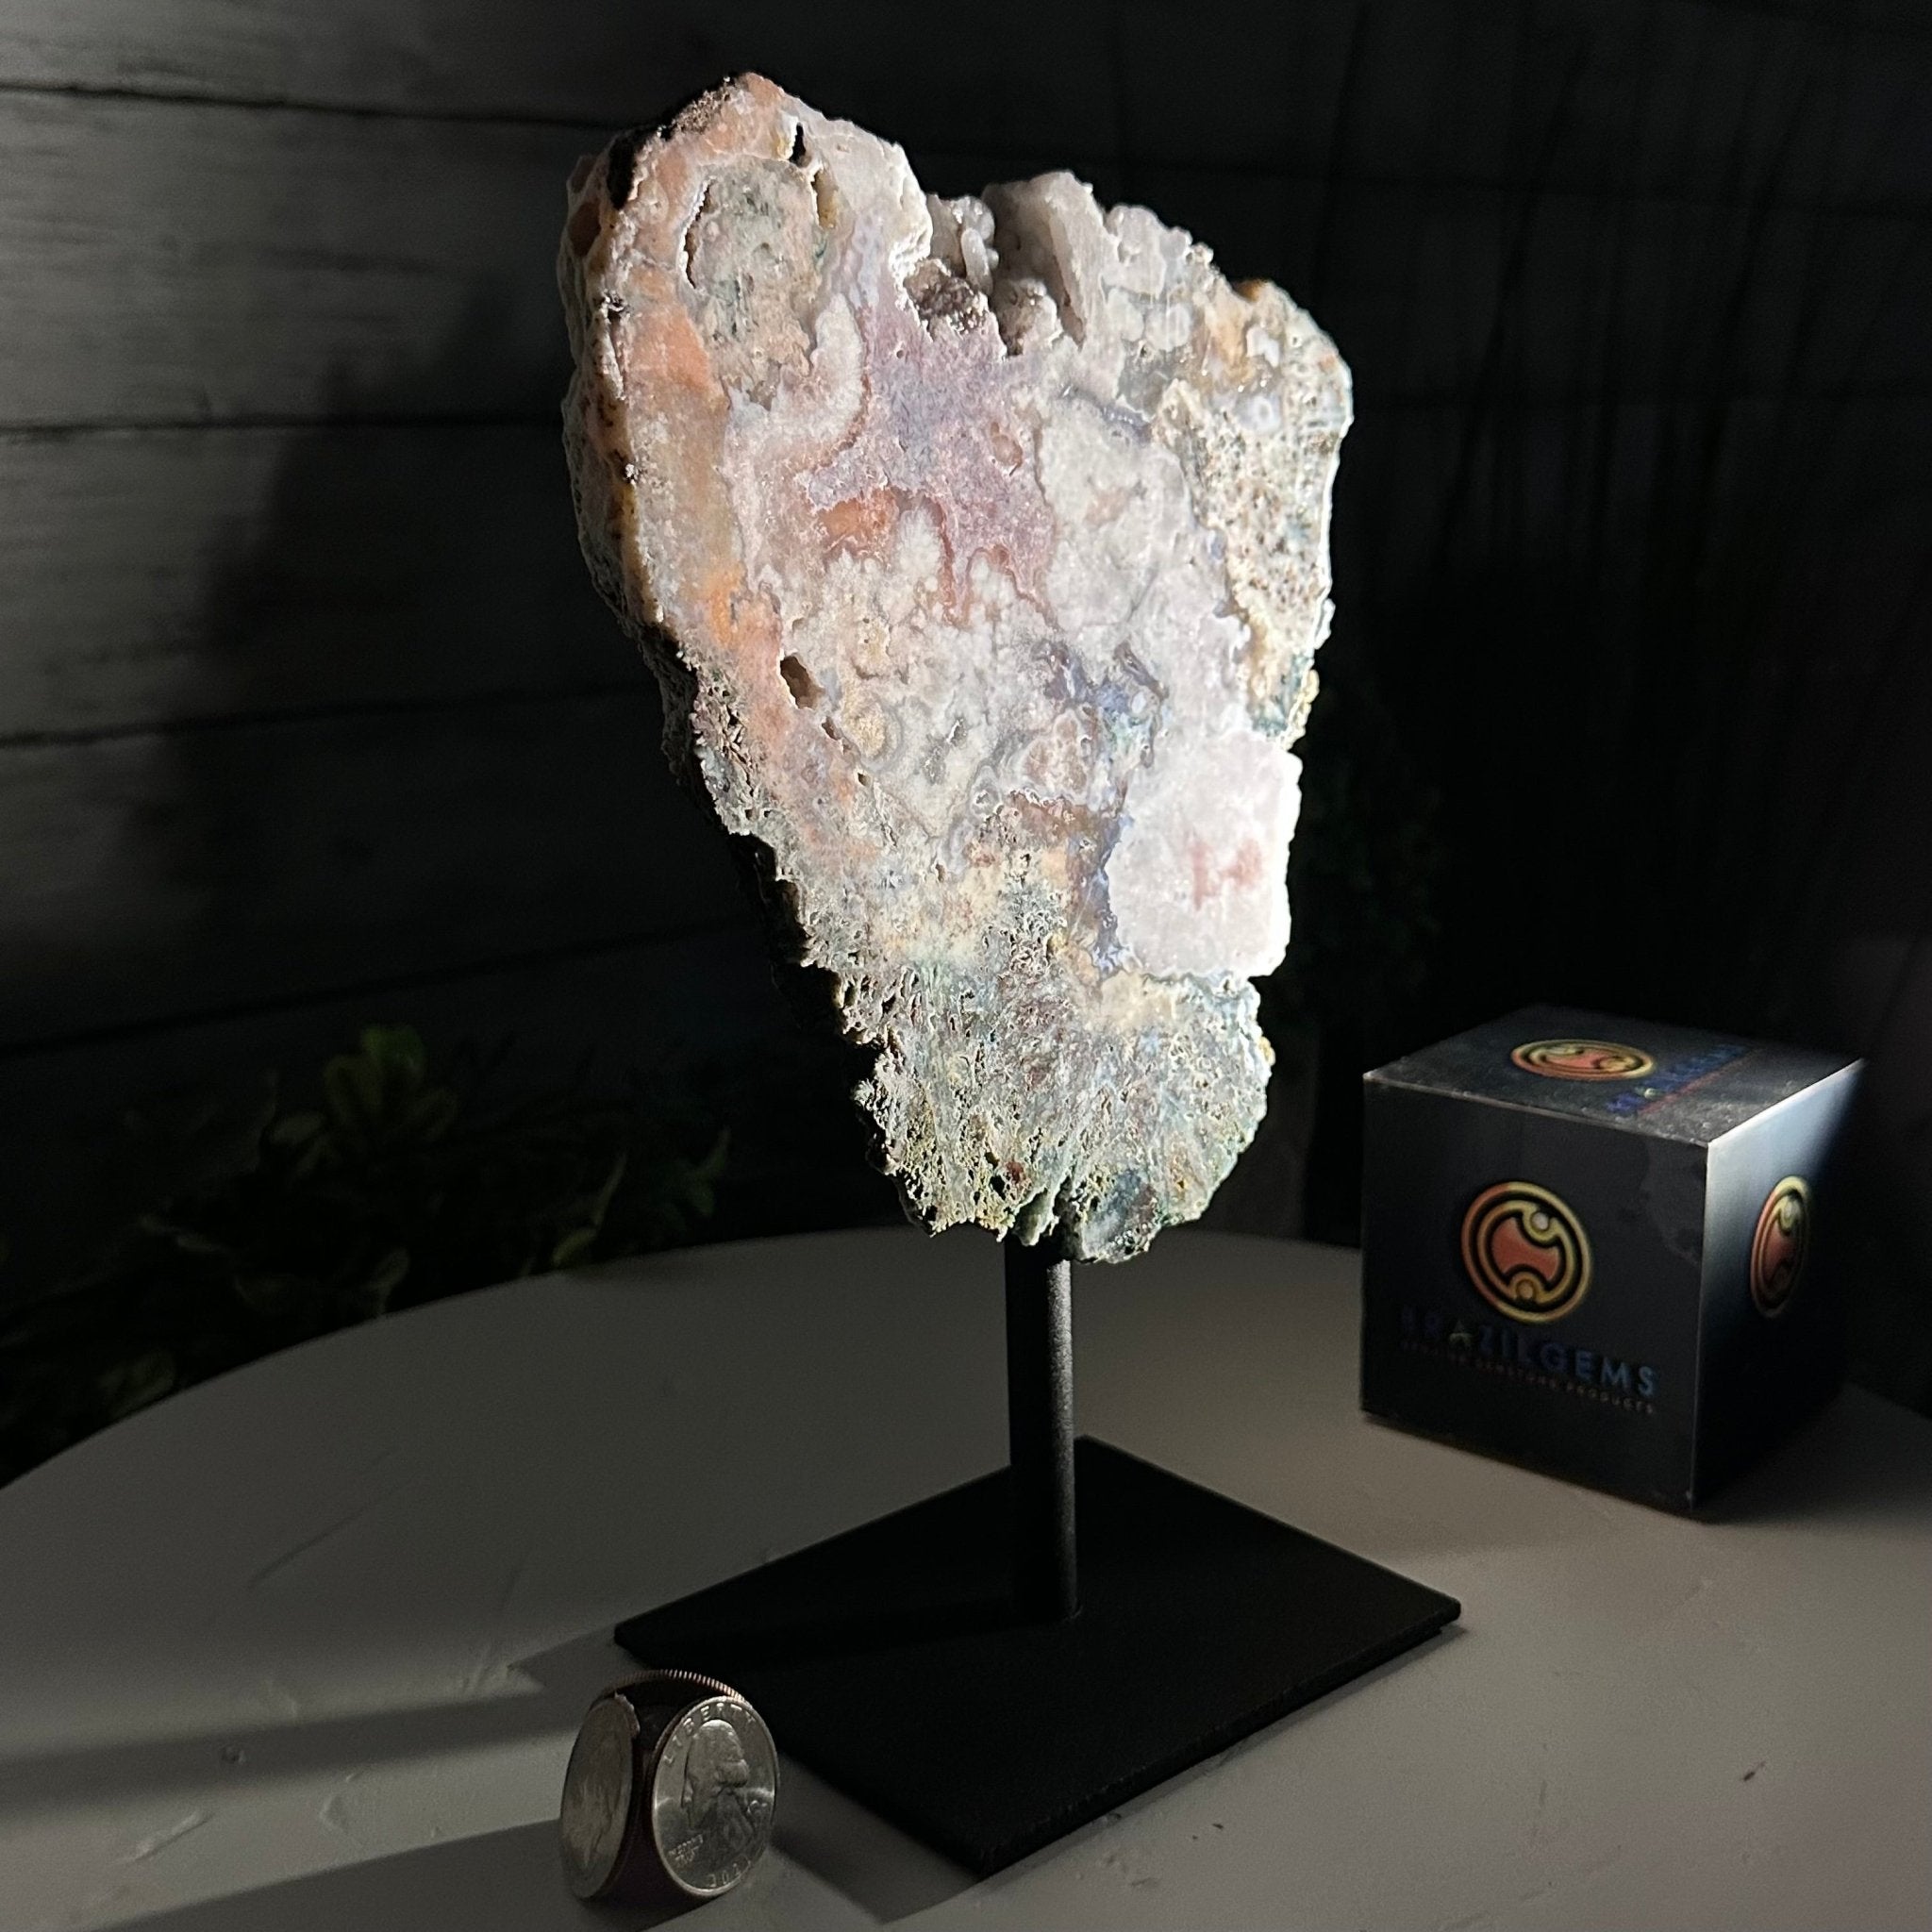 Pink Amethyst Slice on a Stand, 2.1 lbs and 9" Tall #5742-0128 - Brazil GemsBrazil GemsPink Amethyst Slice on a Stand, 2.1 lbs and 9" Tall #5742-0128Slices on Fixed Bases5742-0128